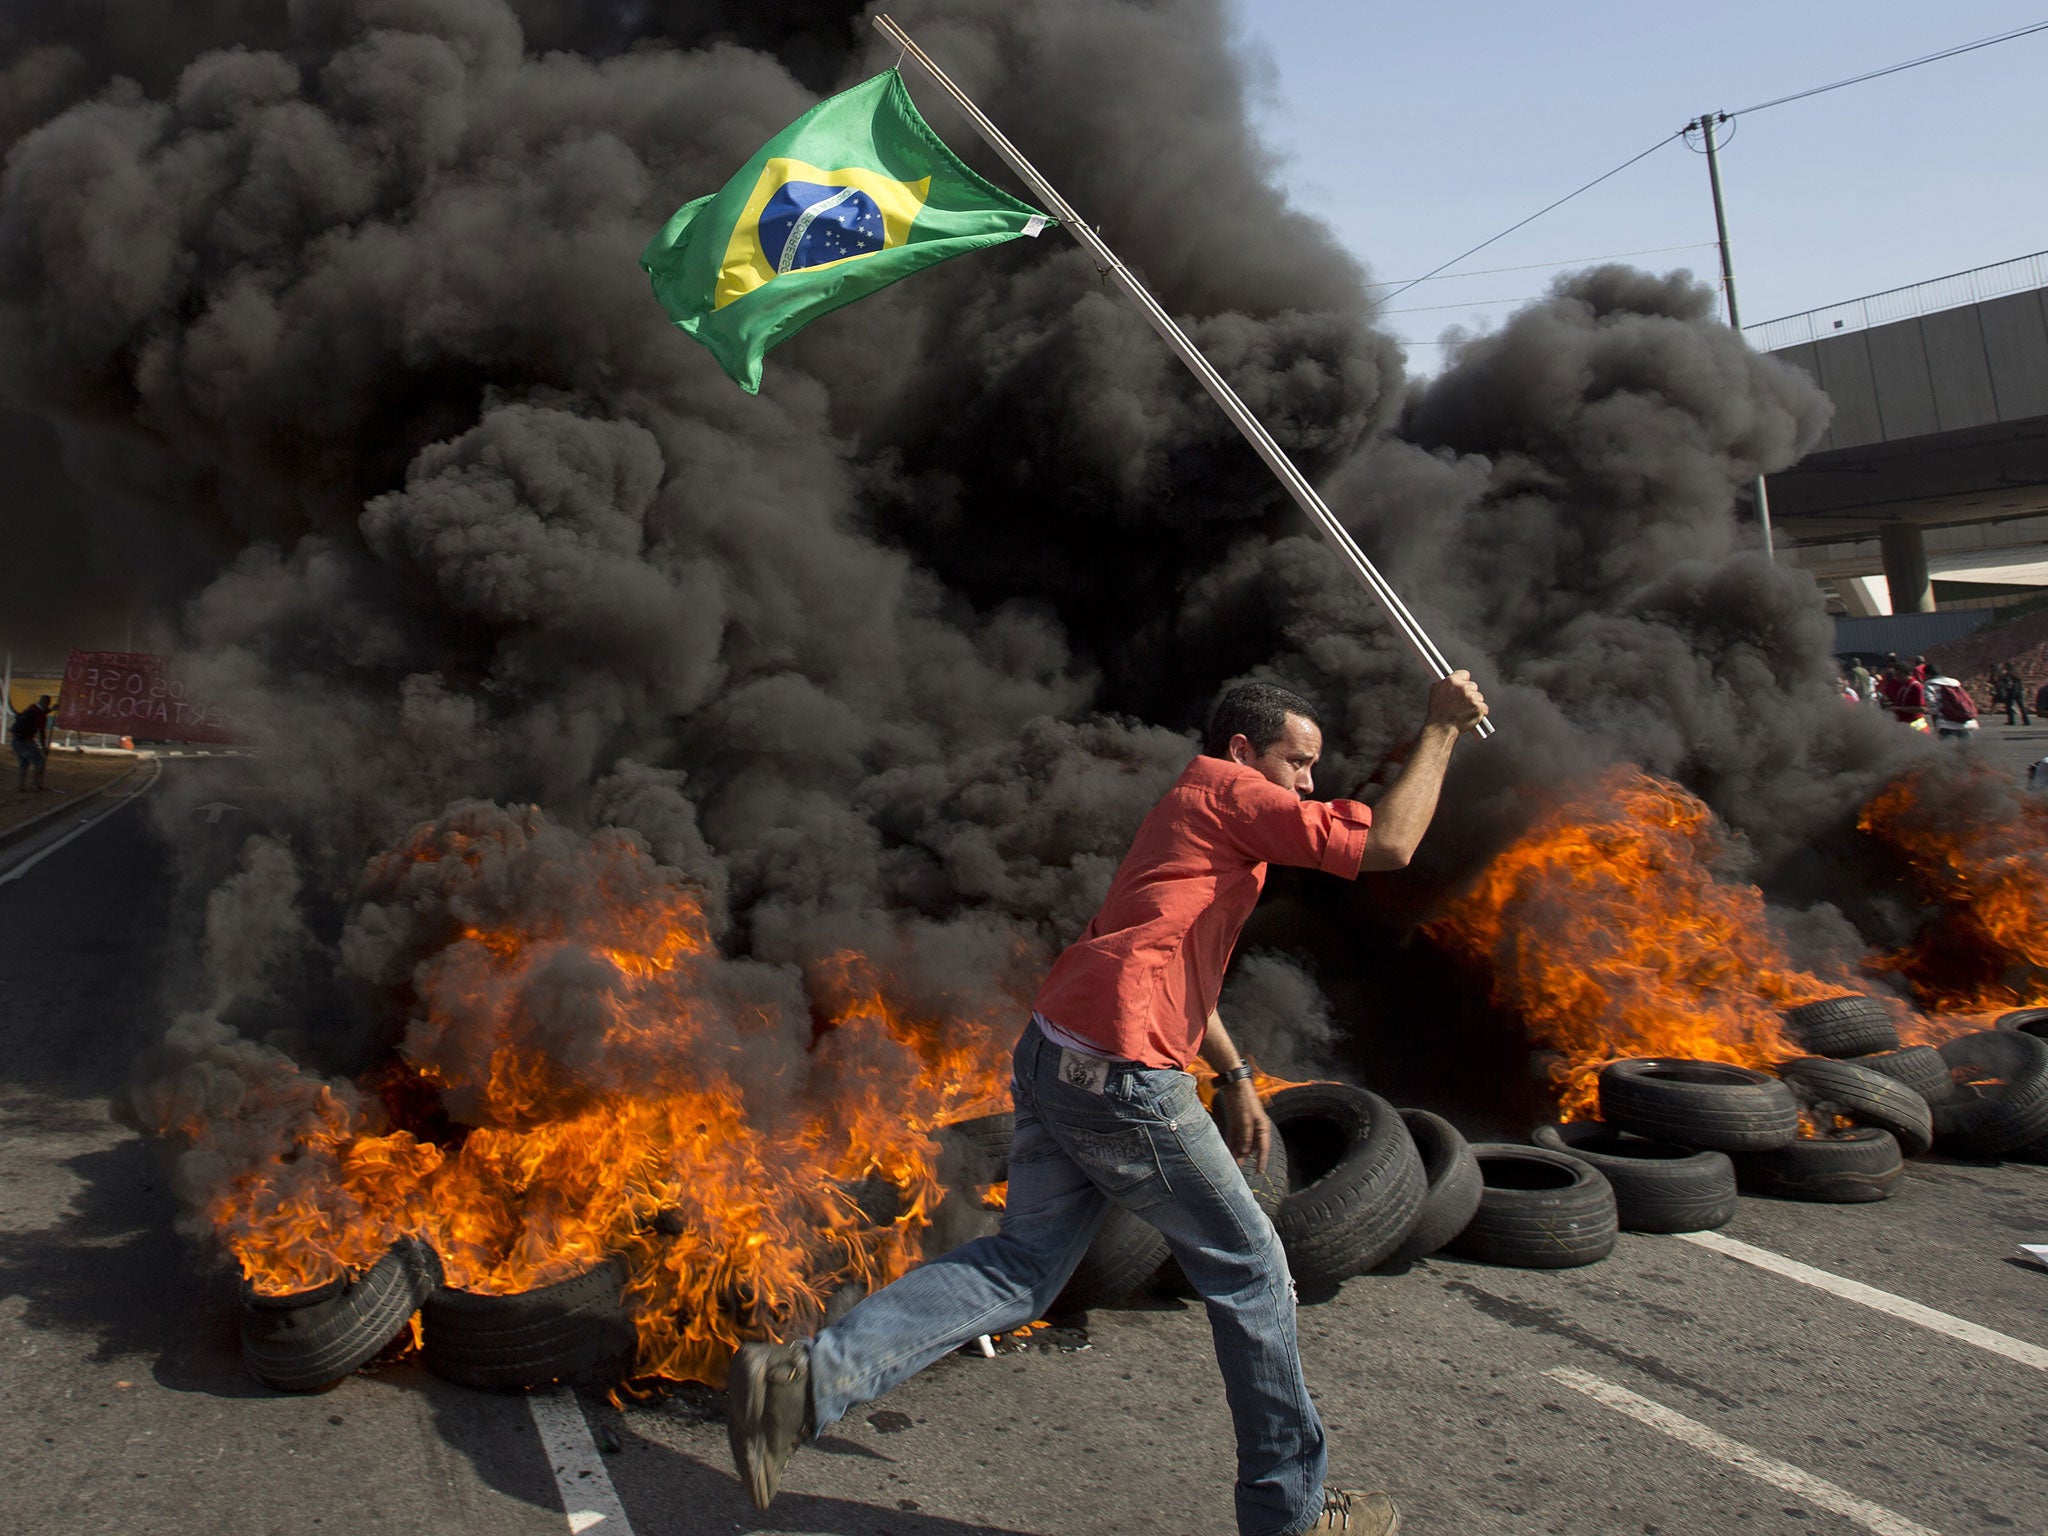 A member of the Homeless Workers Movement carries a Brazilian flag past burning tires during a protest against the money spent on the World Cup near Itaquerao stadium which will host the international soccer tournament's first match in Sao Paulo